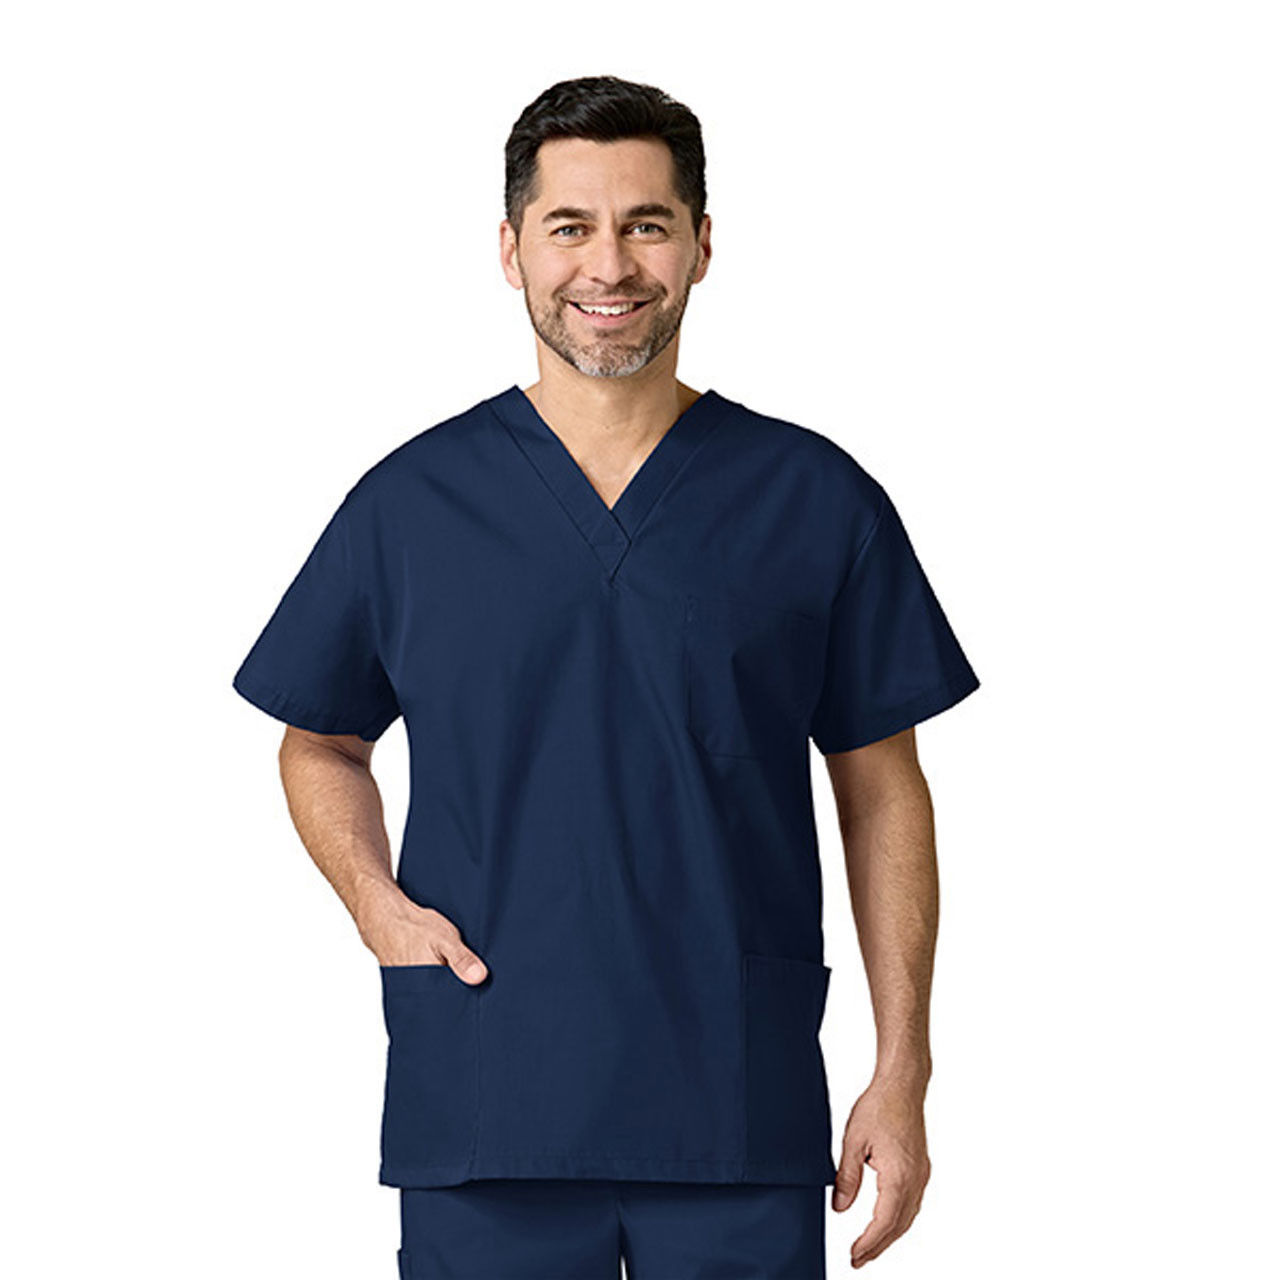 What are the Navy Blue Scrub Tops made of?